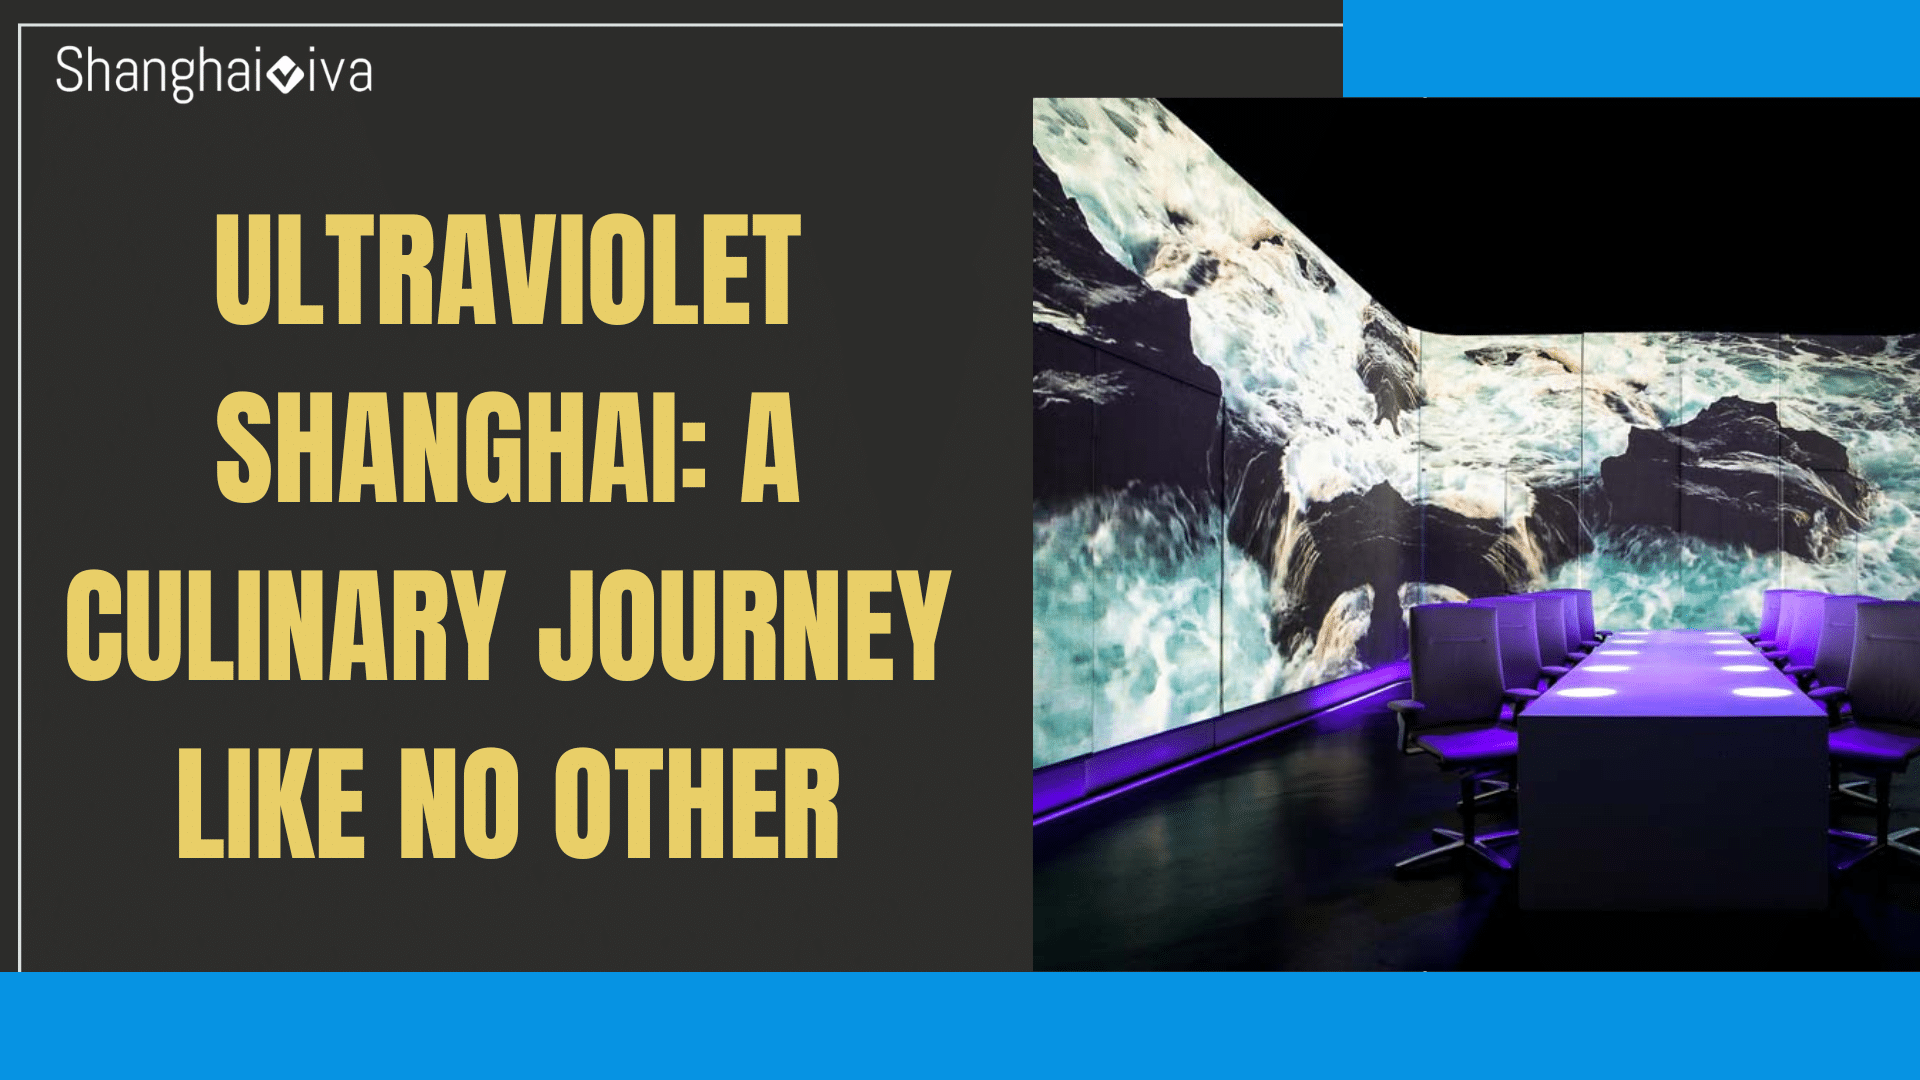 Ultraviolet Shanghai: A Culinary Journey Like No Other